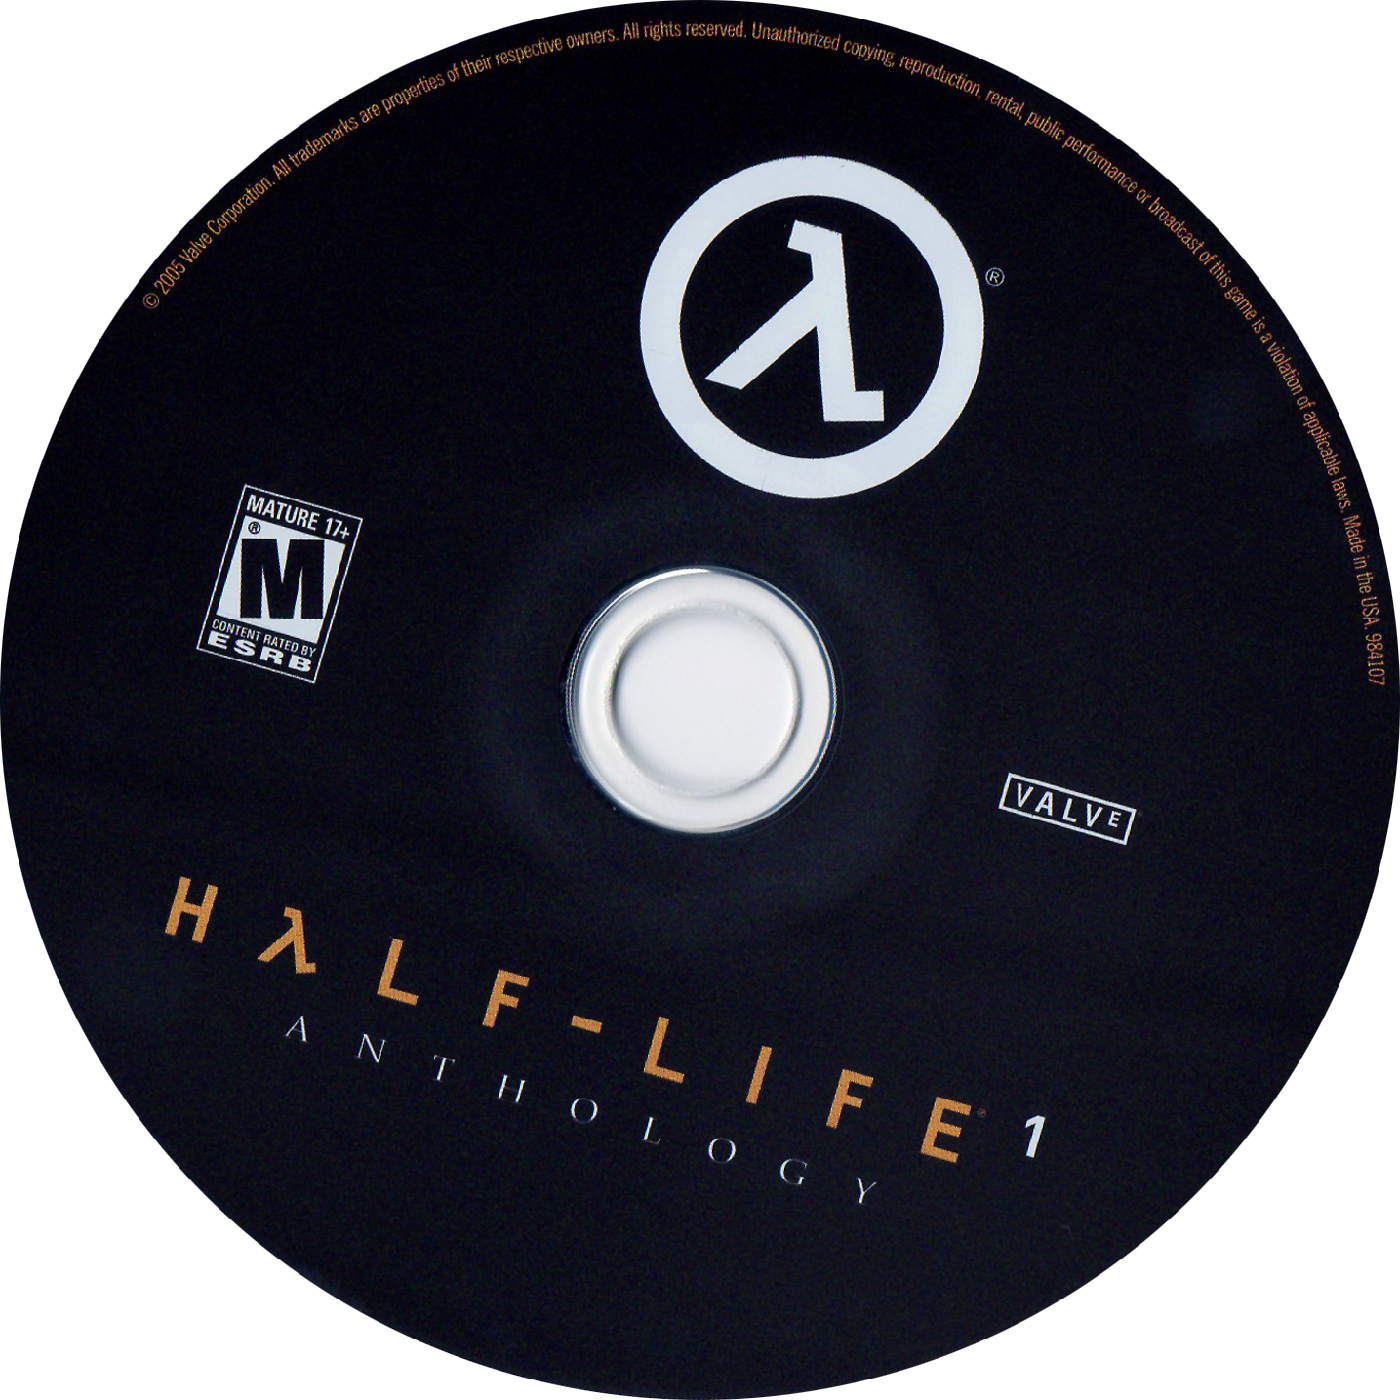 Type the cd key displayed on the half life cd case фото 90